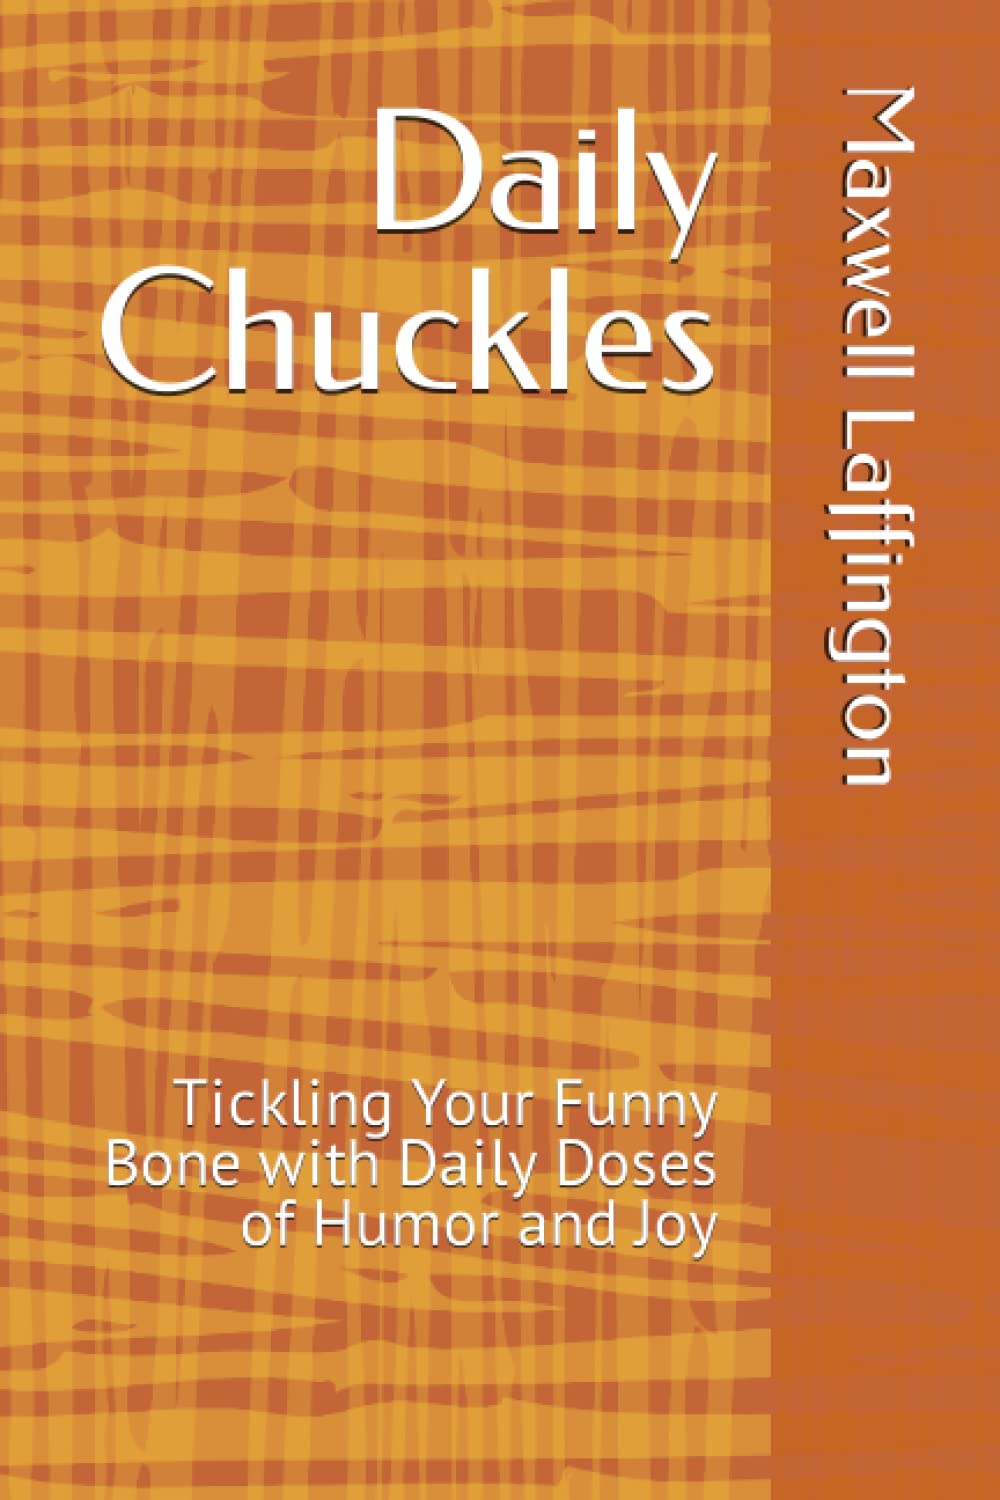 Daily Chuckles: A Lighthearted Laugh Journal for Everyday Smiles: Tickling Your Funny Bone with Daily Doses of Humor and Joy